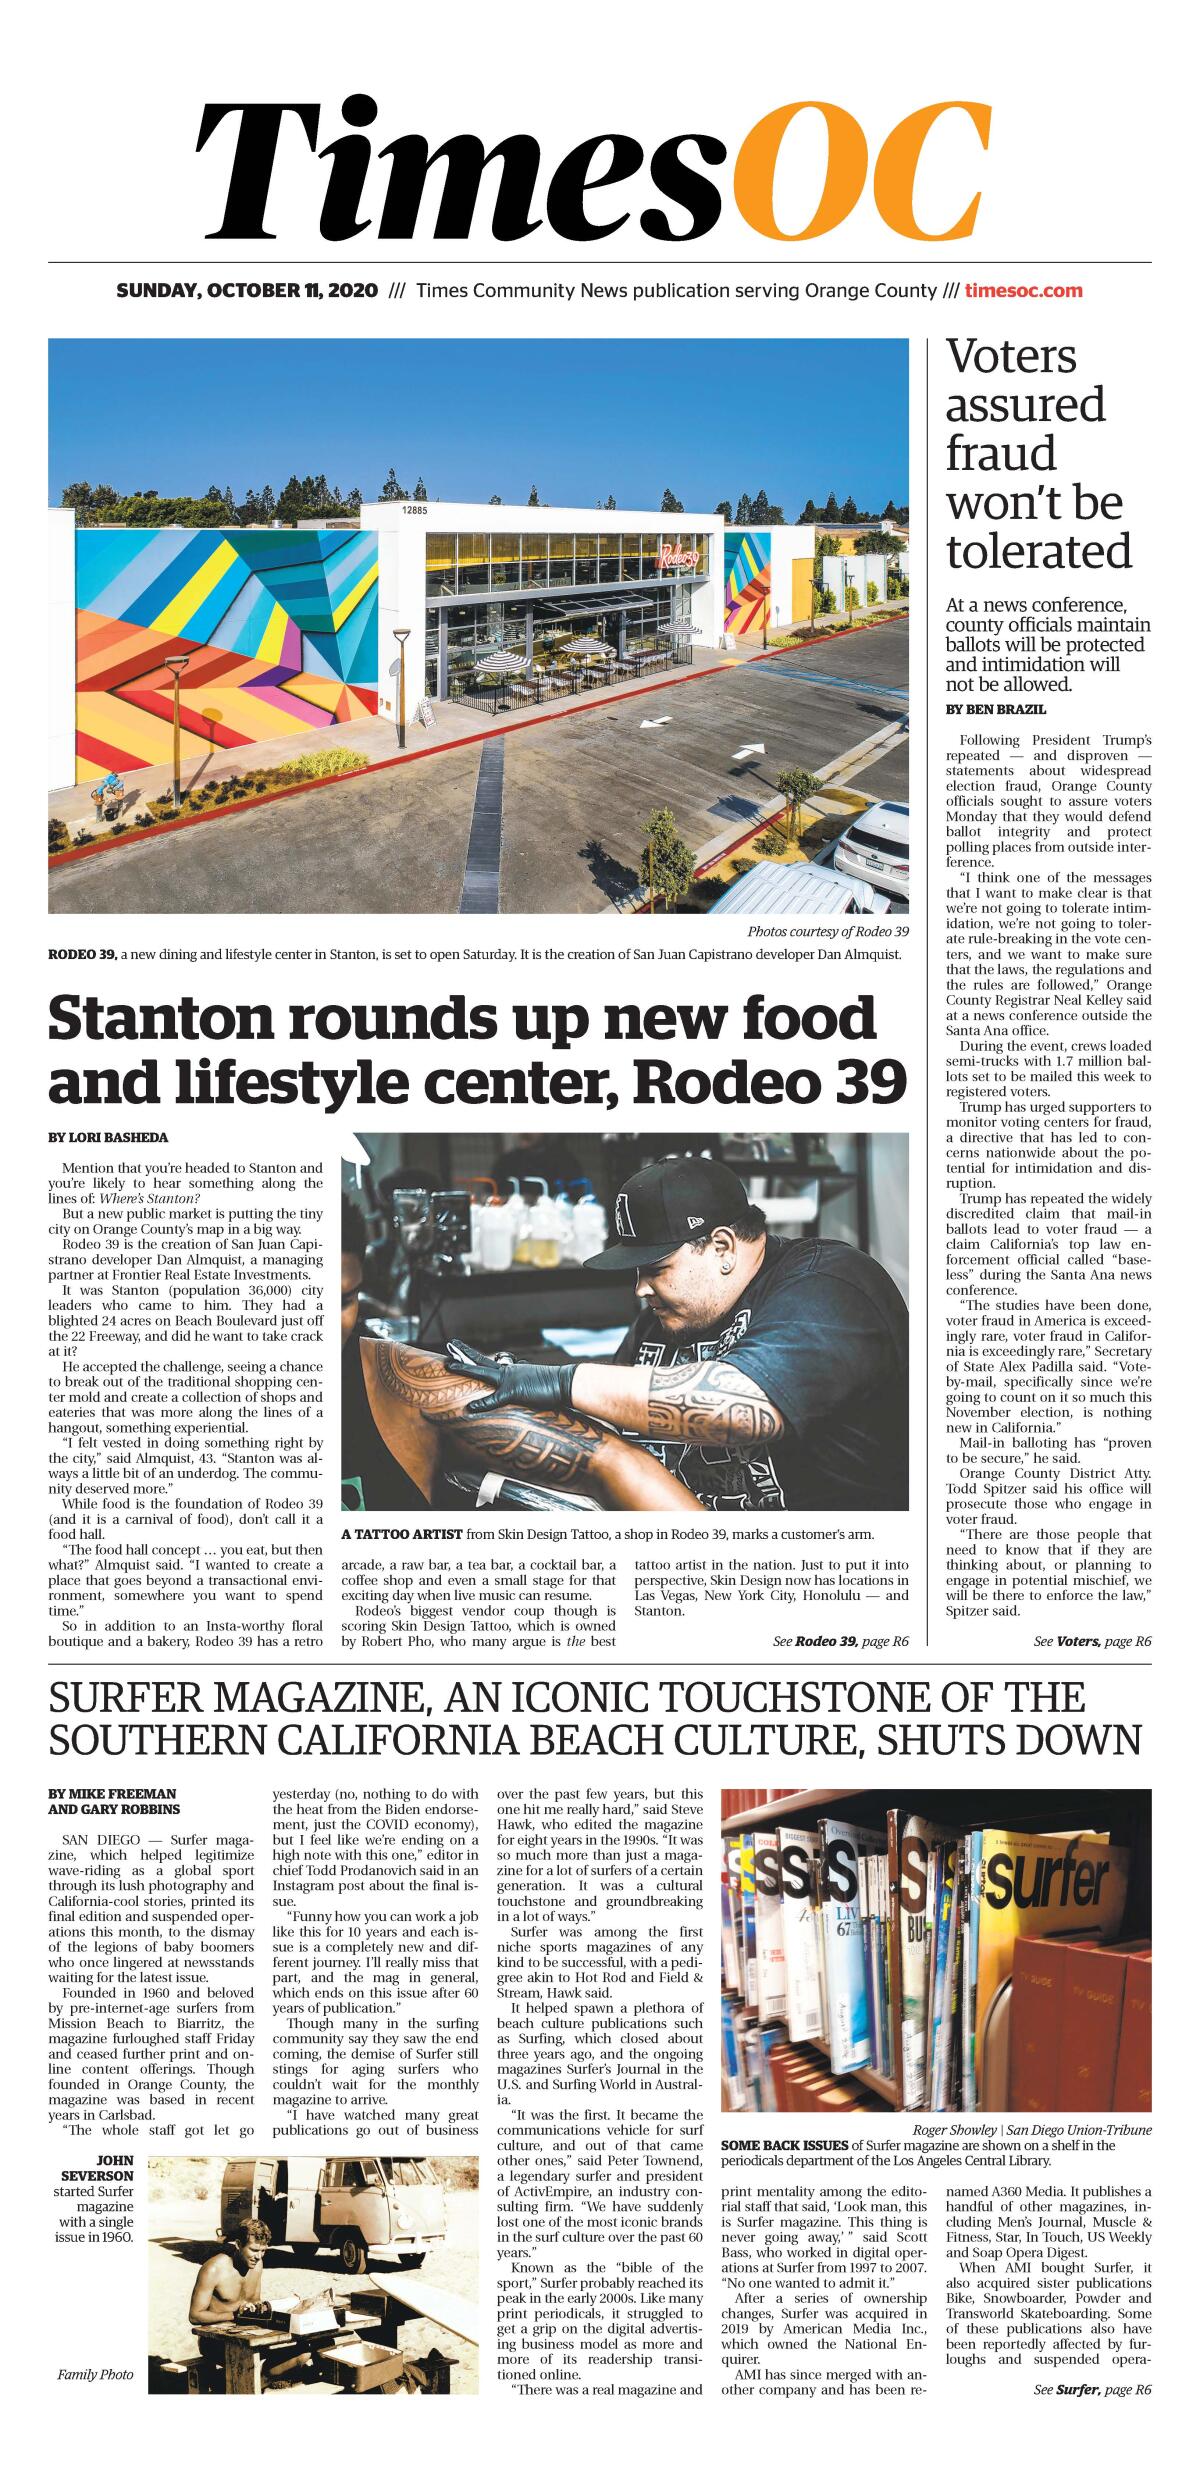 Front page of Times OC e-Newspaper for Sunday, Oct. 11, 2020